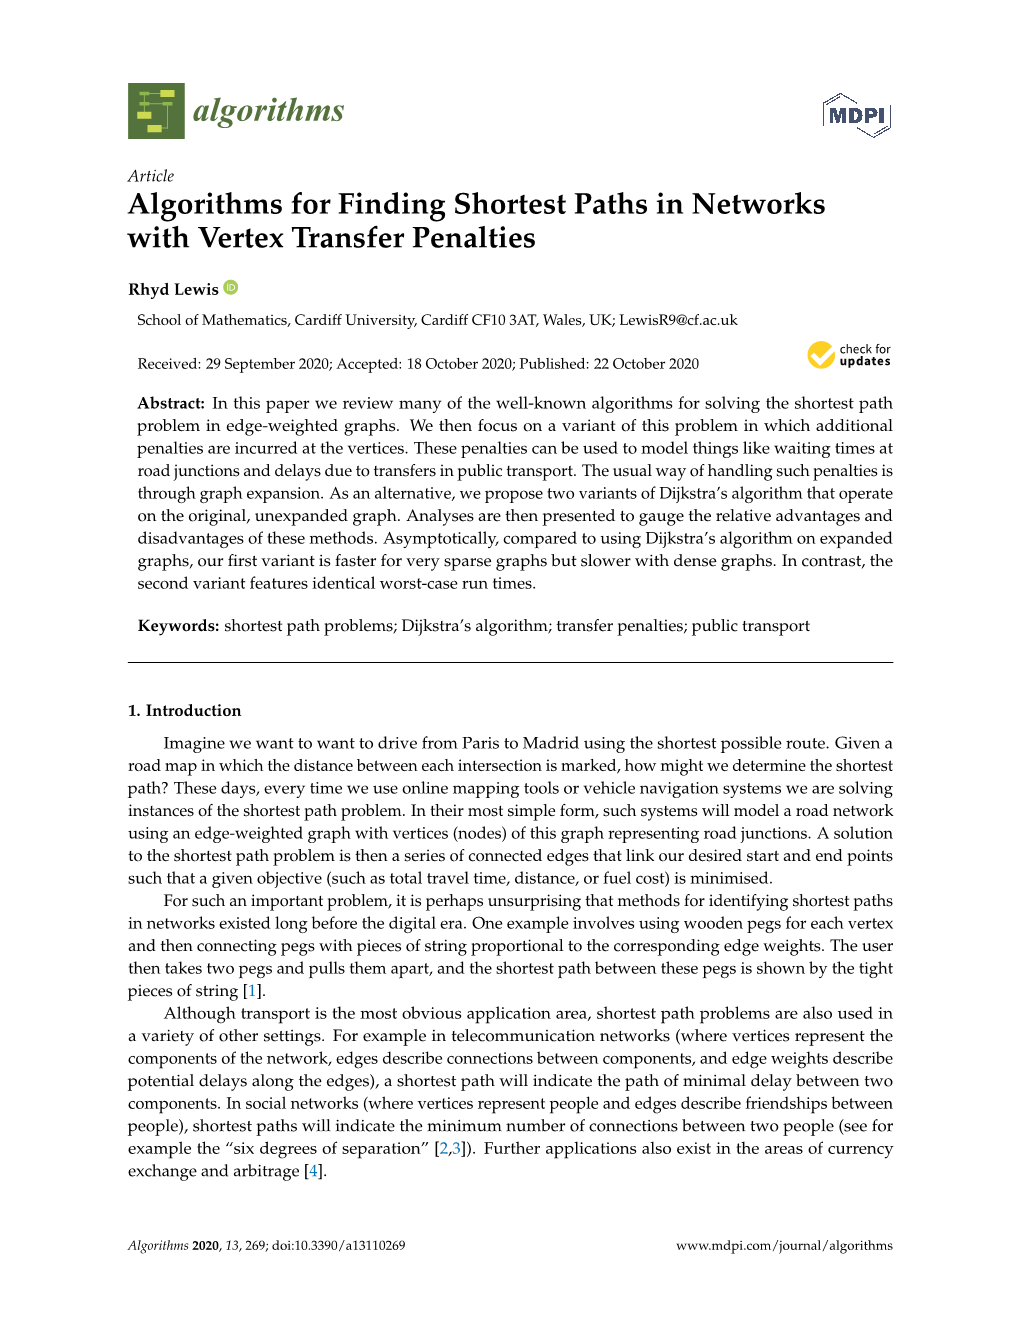 Algorithms for Finding Shortest Paths in Networks with Vertex Transfer Penalties